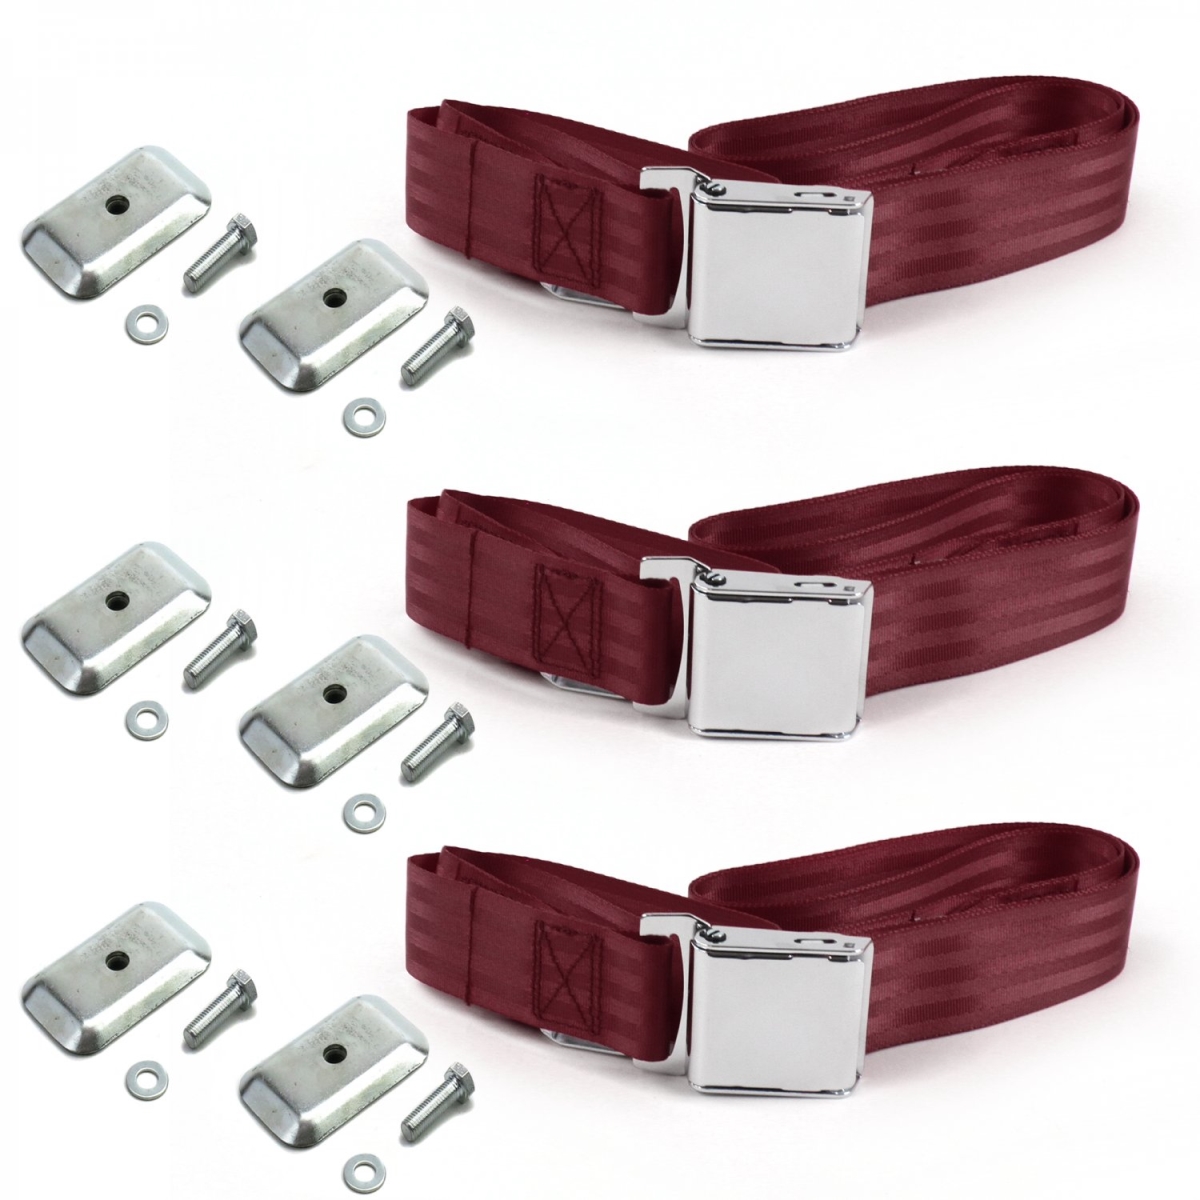 679625 Chevy Chevelle 1964-1967 Airplane 2 Point Burgandy Lap Bench Seat Belt Kit with Bracketry - 3 Belts -  safeTboy